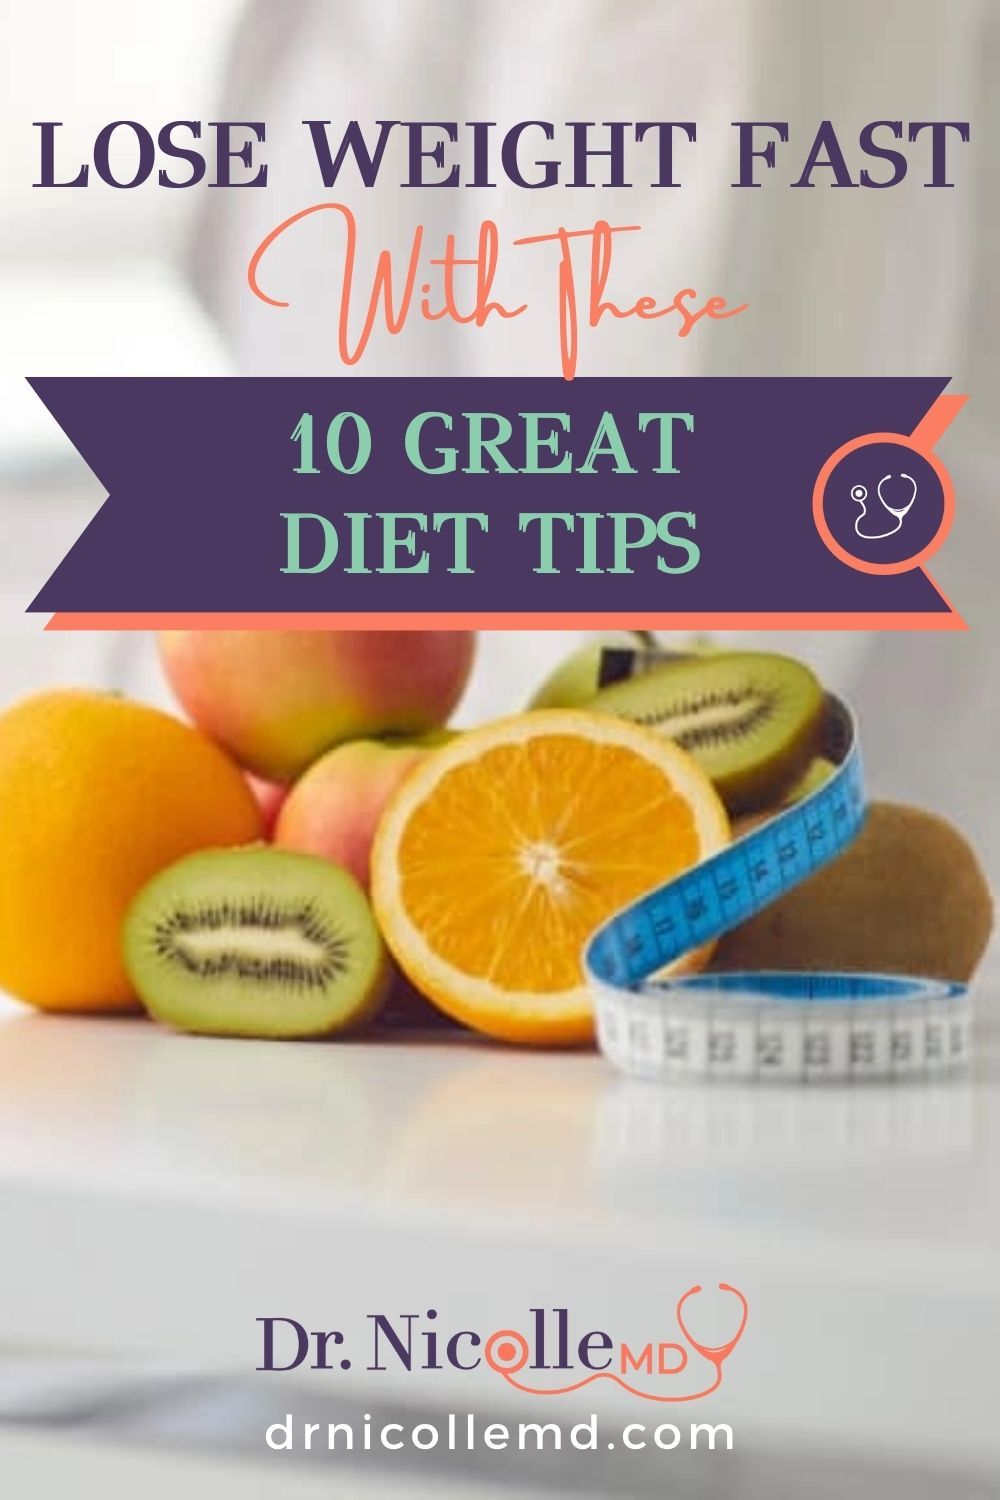 Lose Weight Fast With These 10 Great Diet Tips